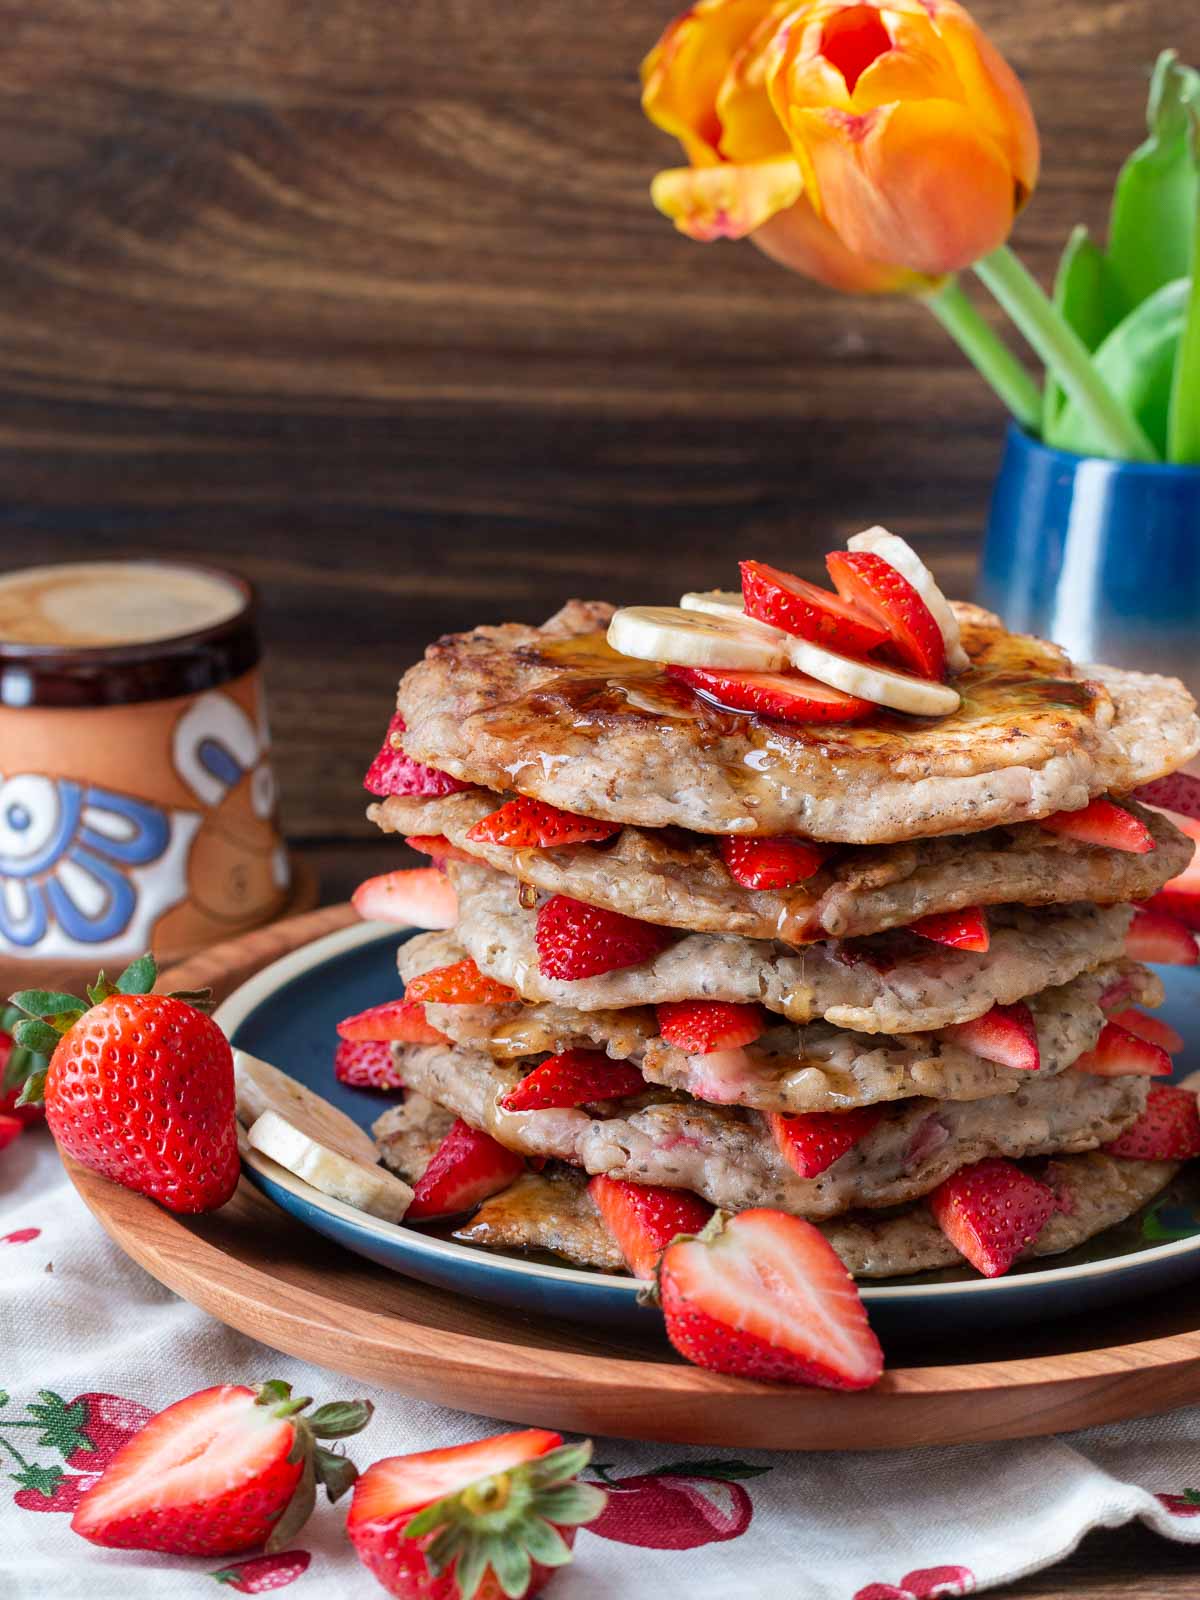 Chia seed pancakes stacked with strawberries in between and a cup of coffee and fresh tulips in the background.